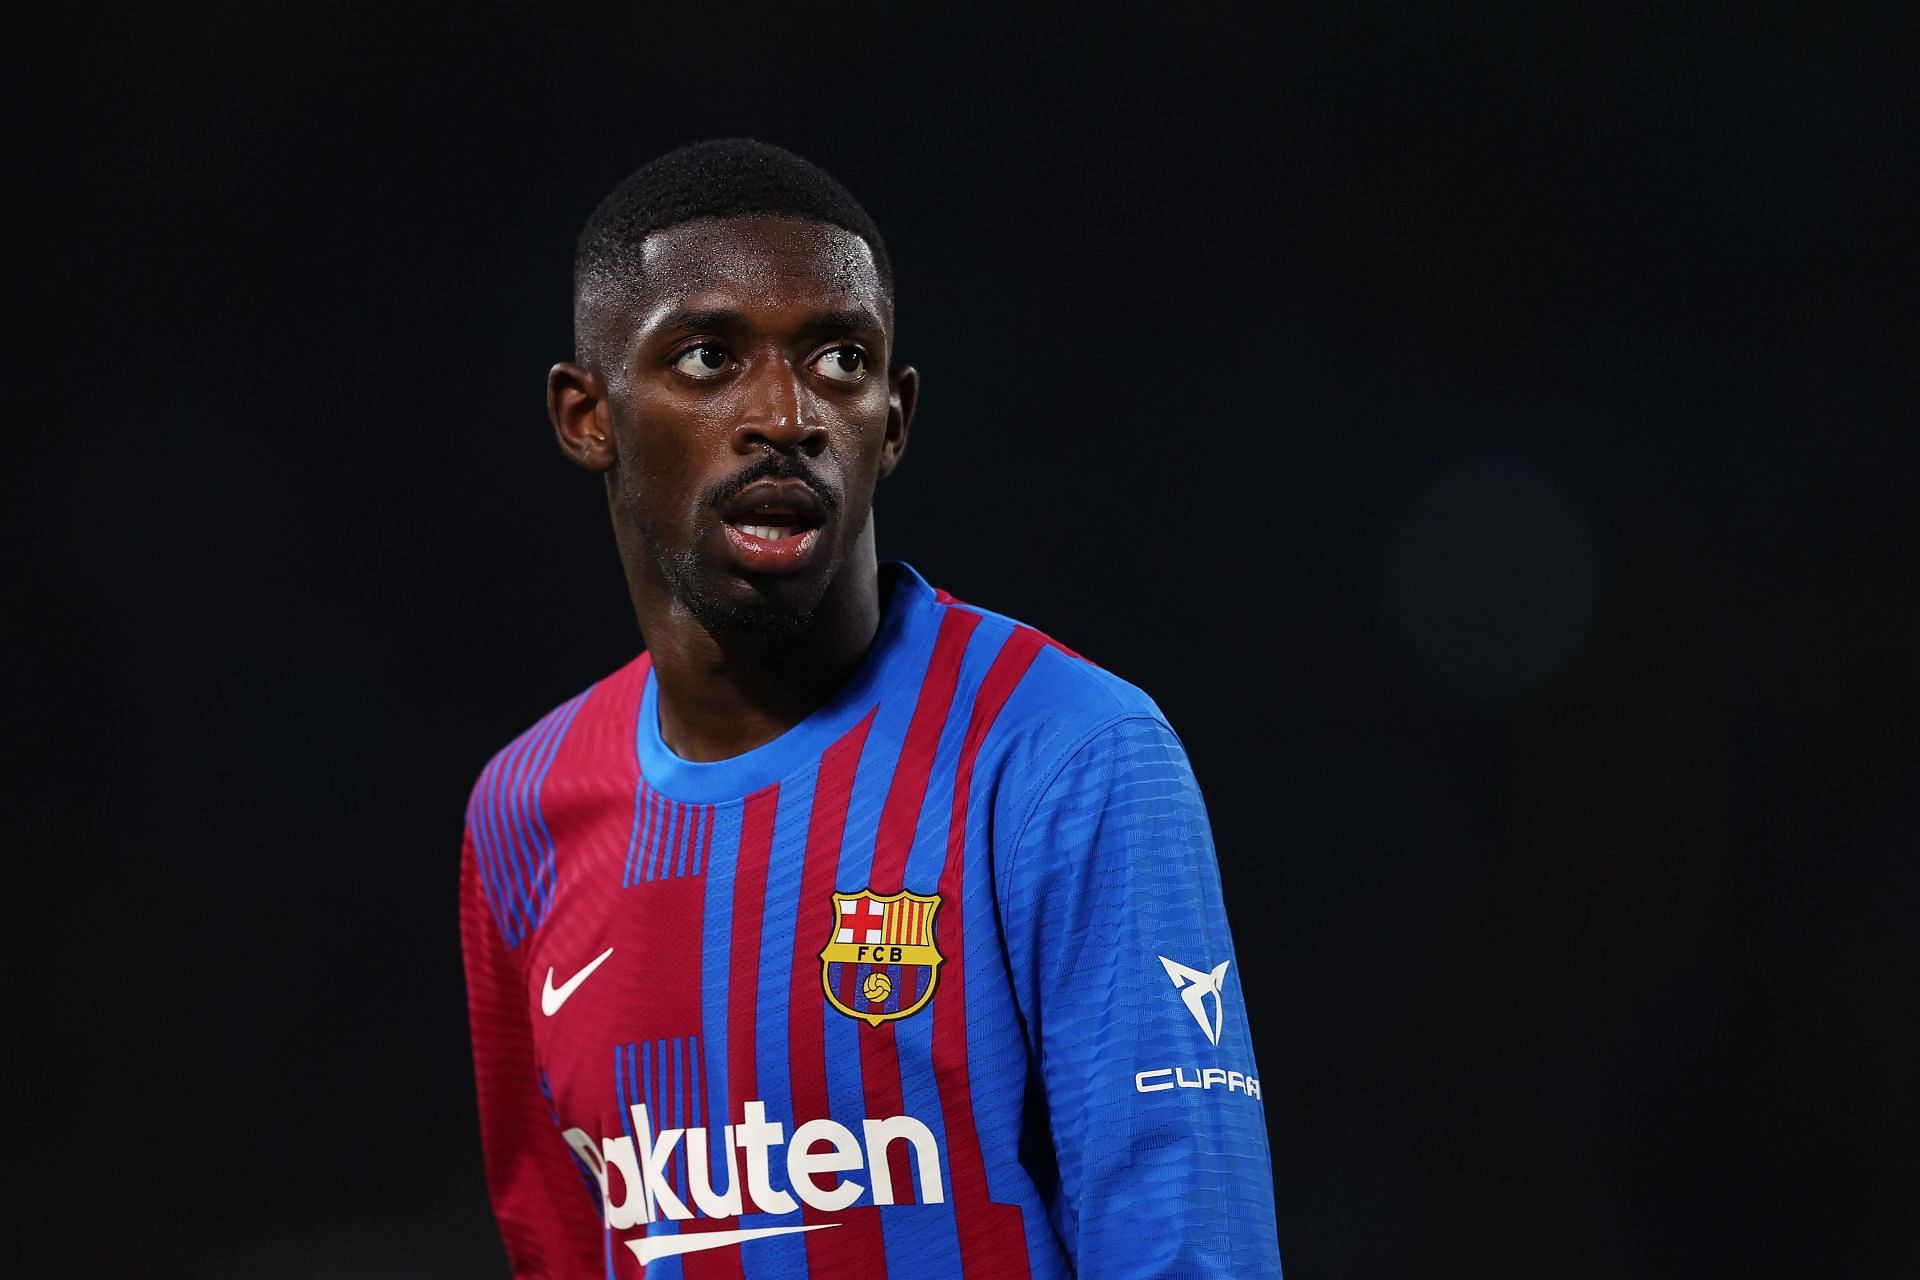 Dembele has been a perennial problem for Barcelona.